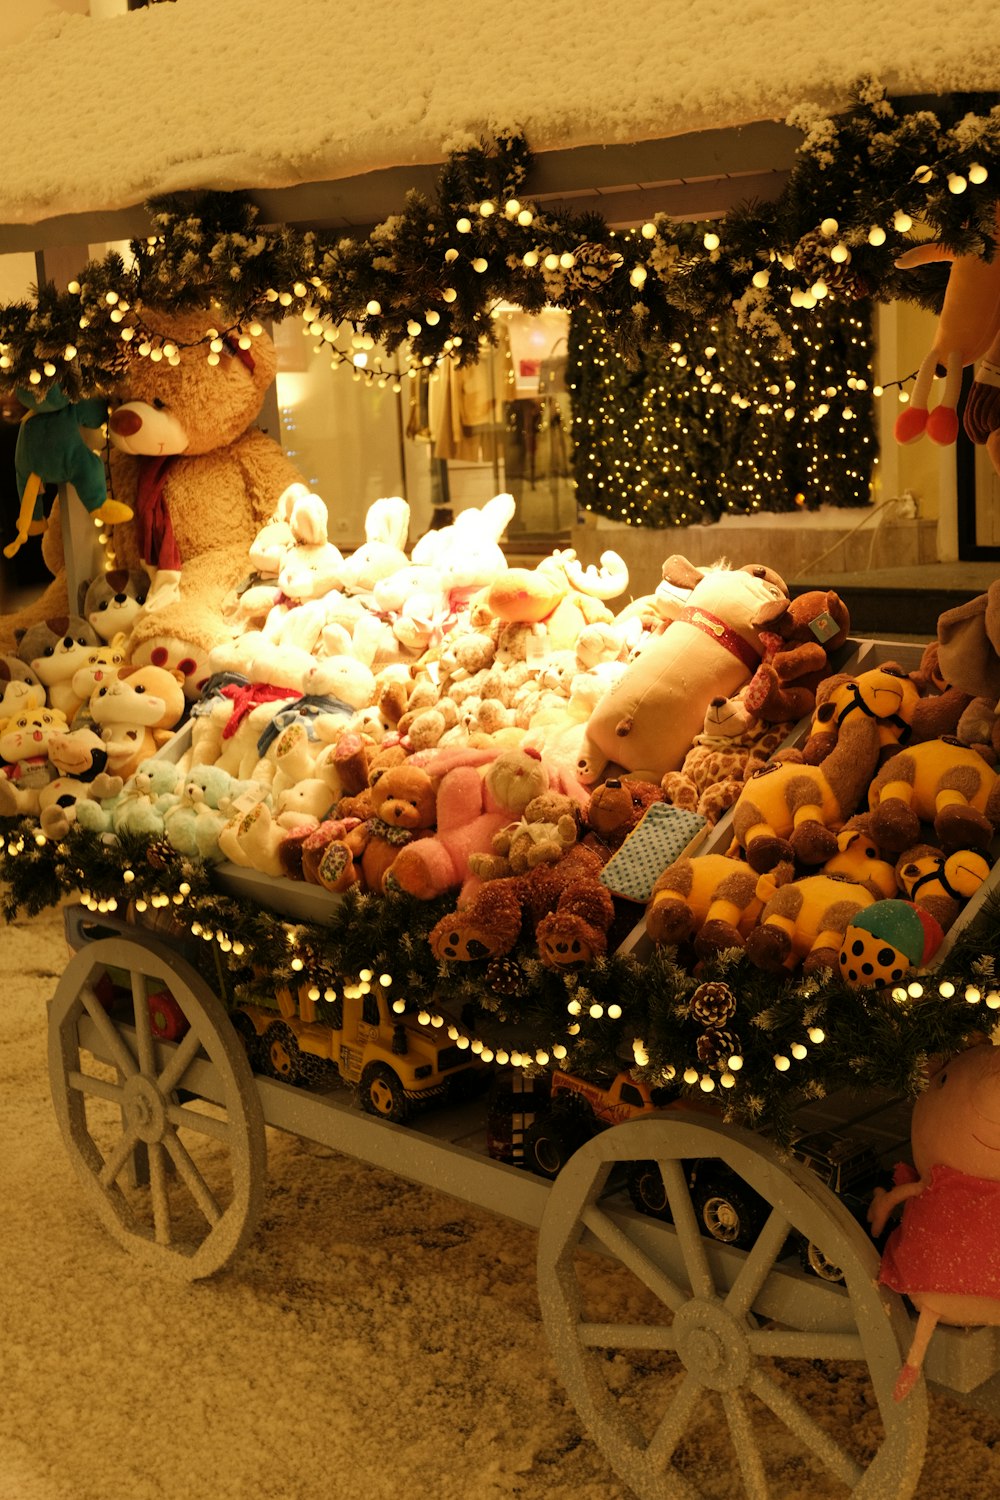 a wagon filled with lots of stuffed animals